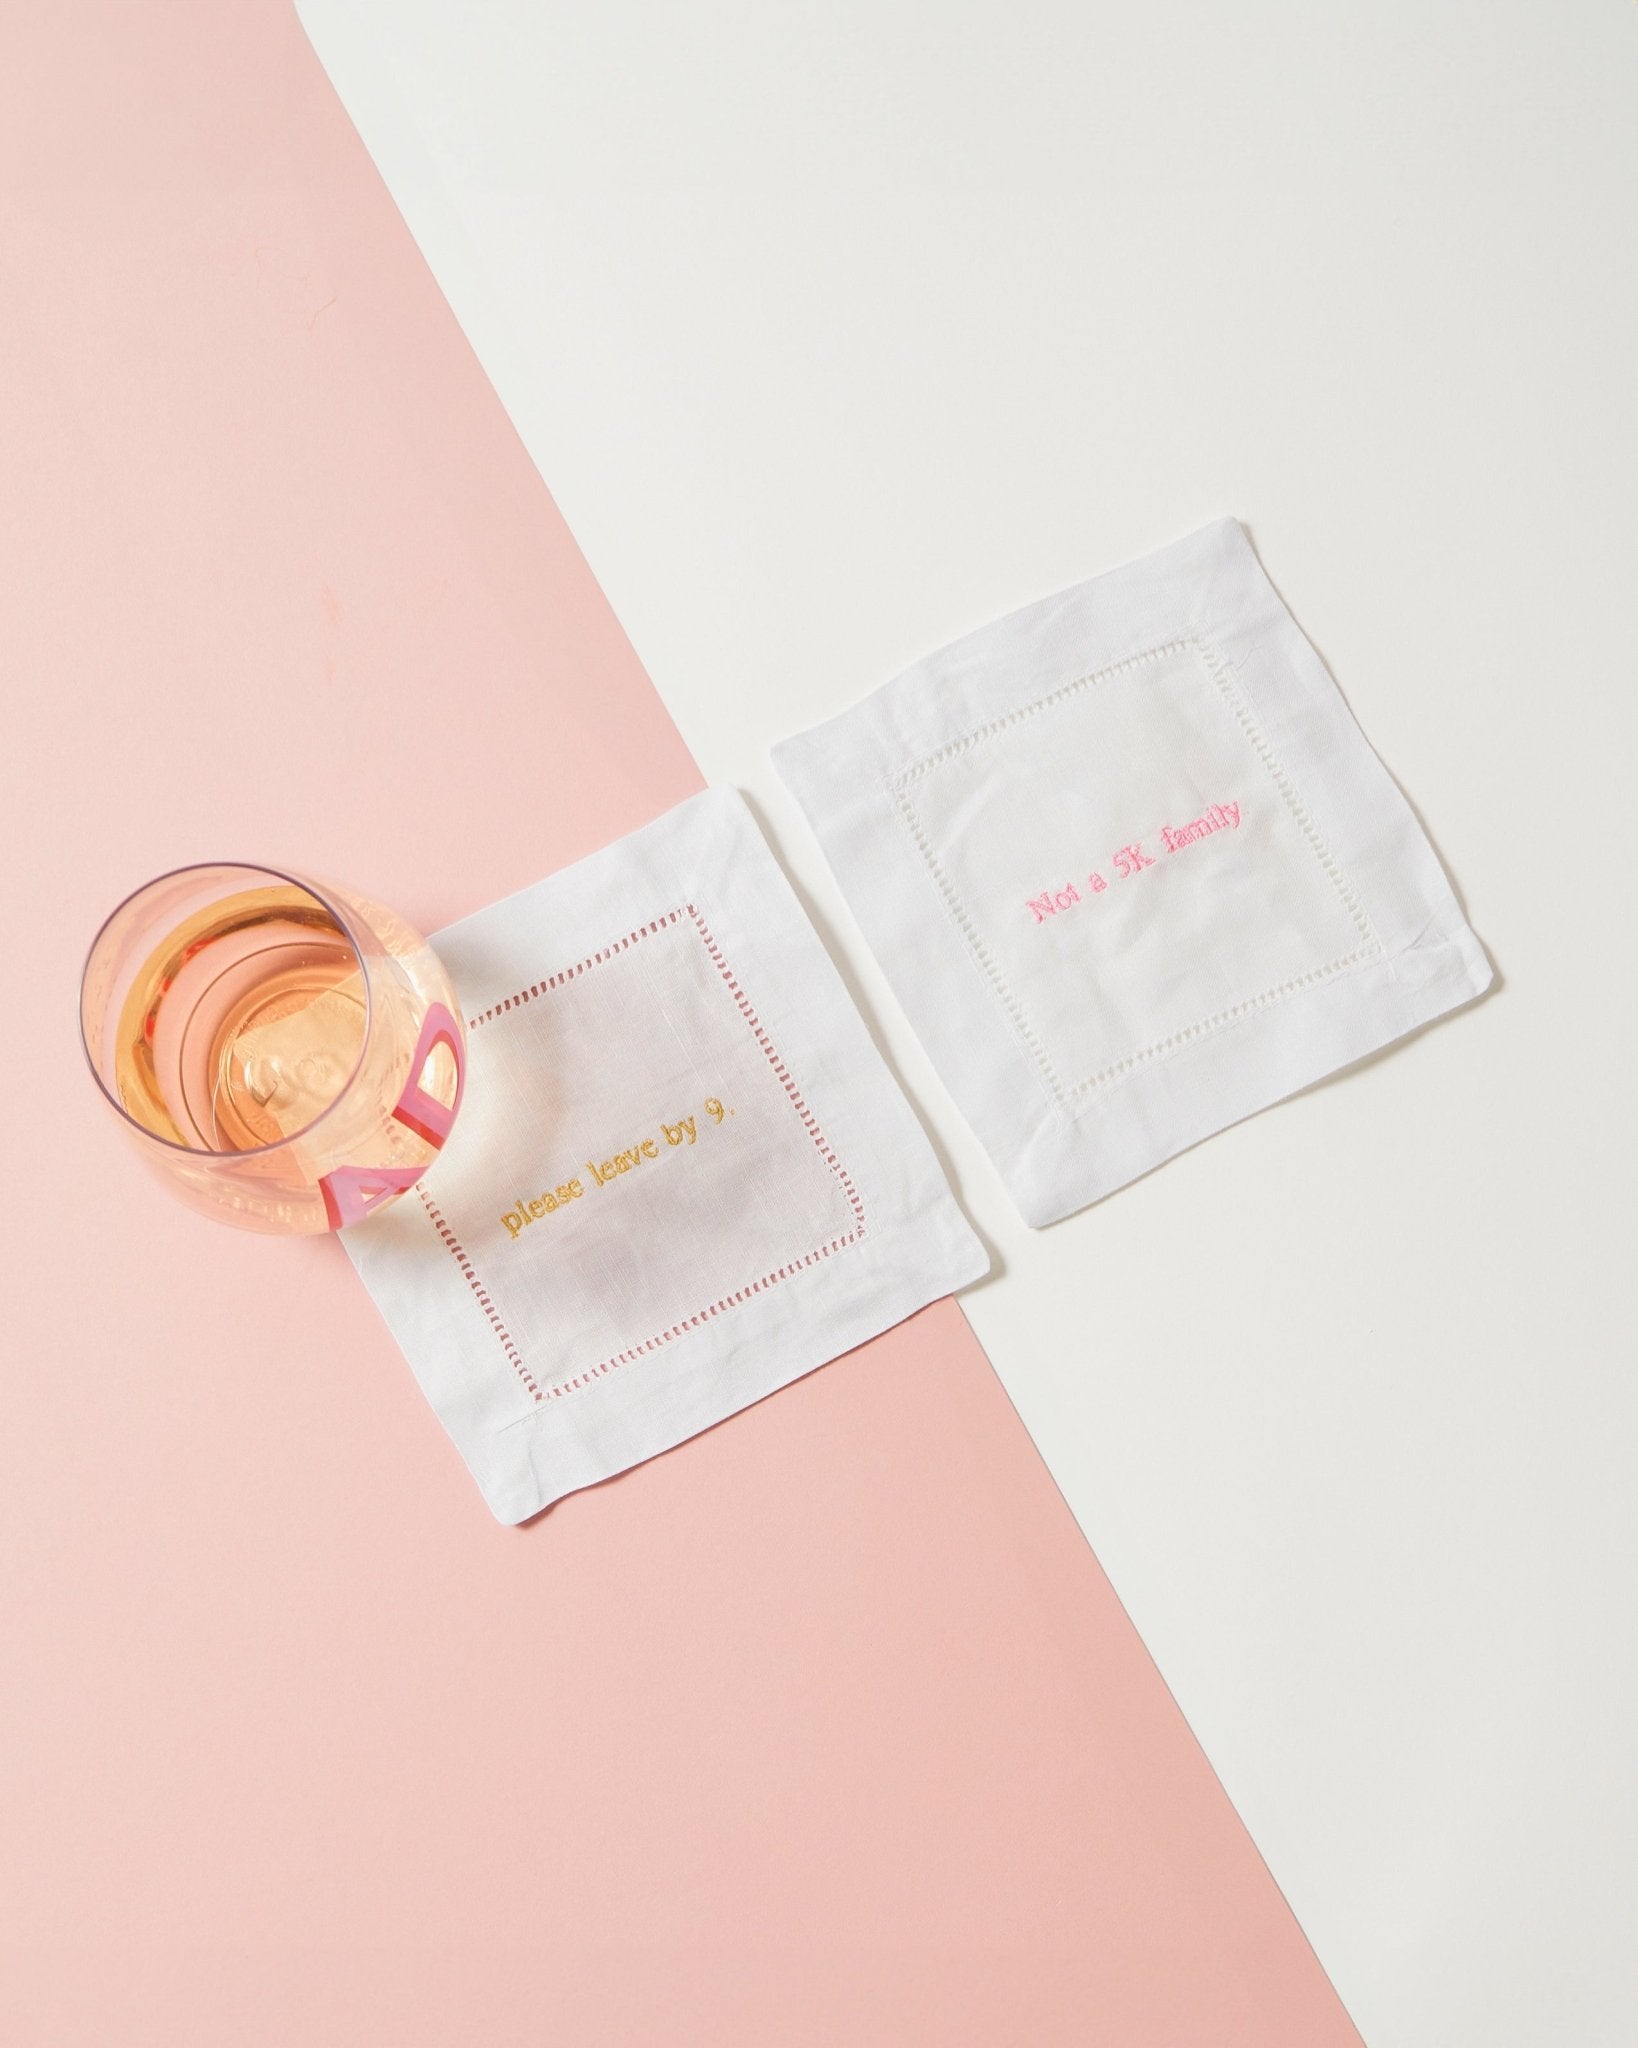 Two cocktail napkins customized with ironic phrases in pink and gold thread